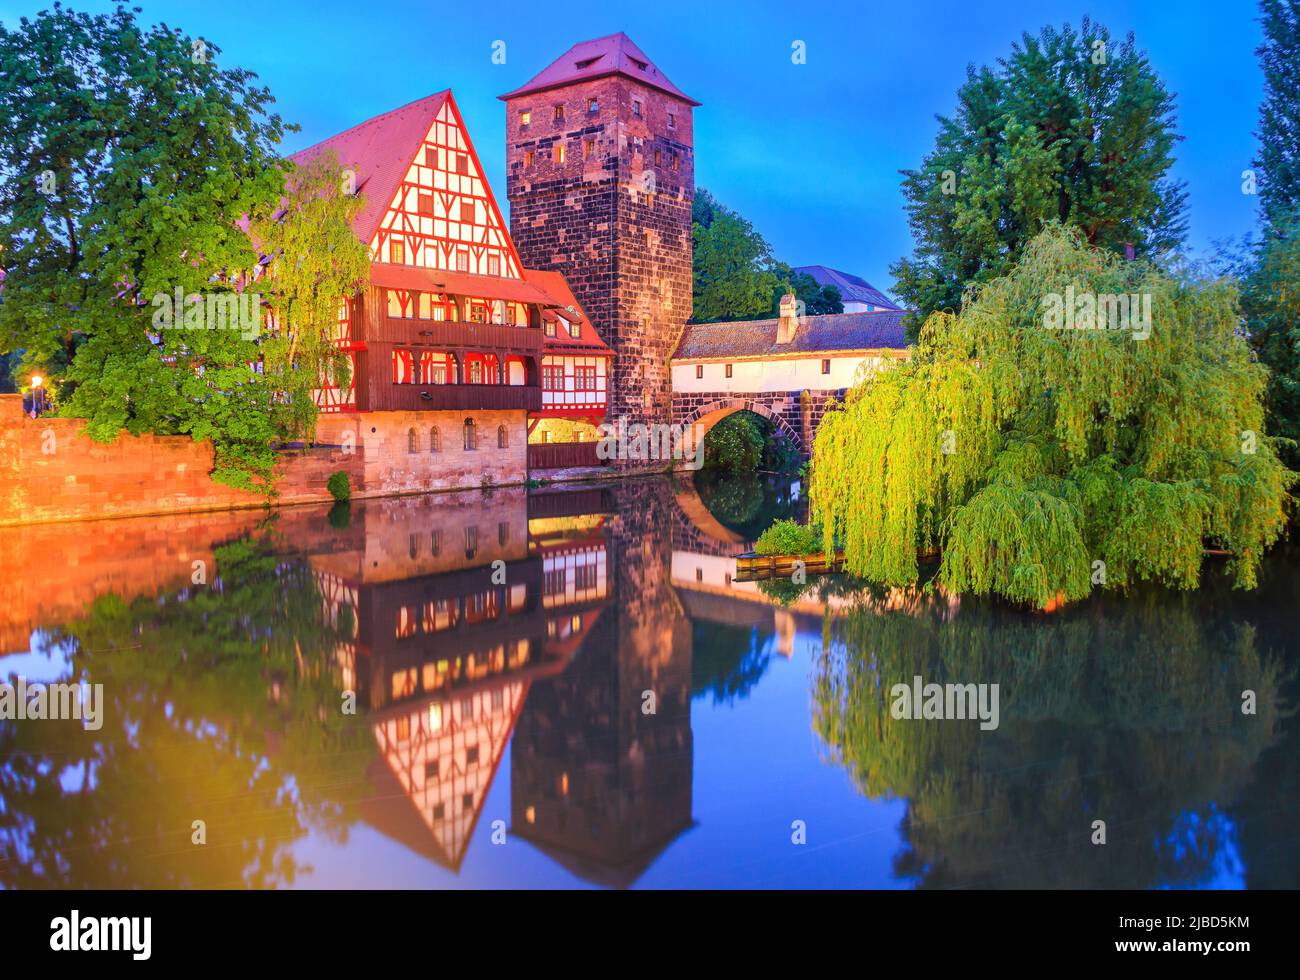 Nuremberg, Germany. The Wine Warehouse (Weinstadel) on the banks of the Pegnitz river. Stock Photo